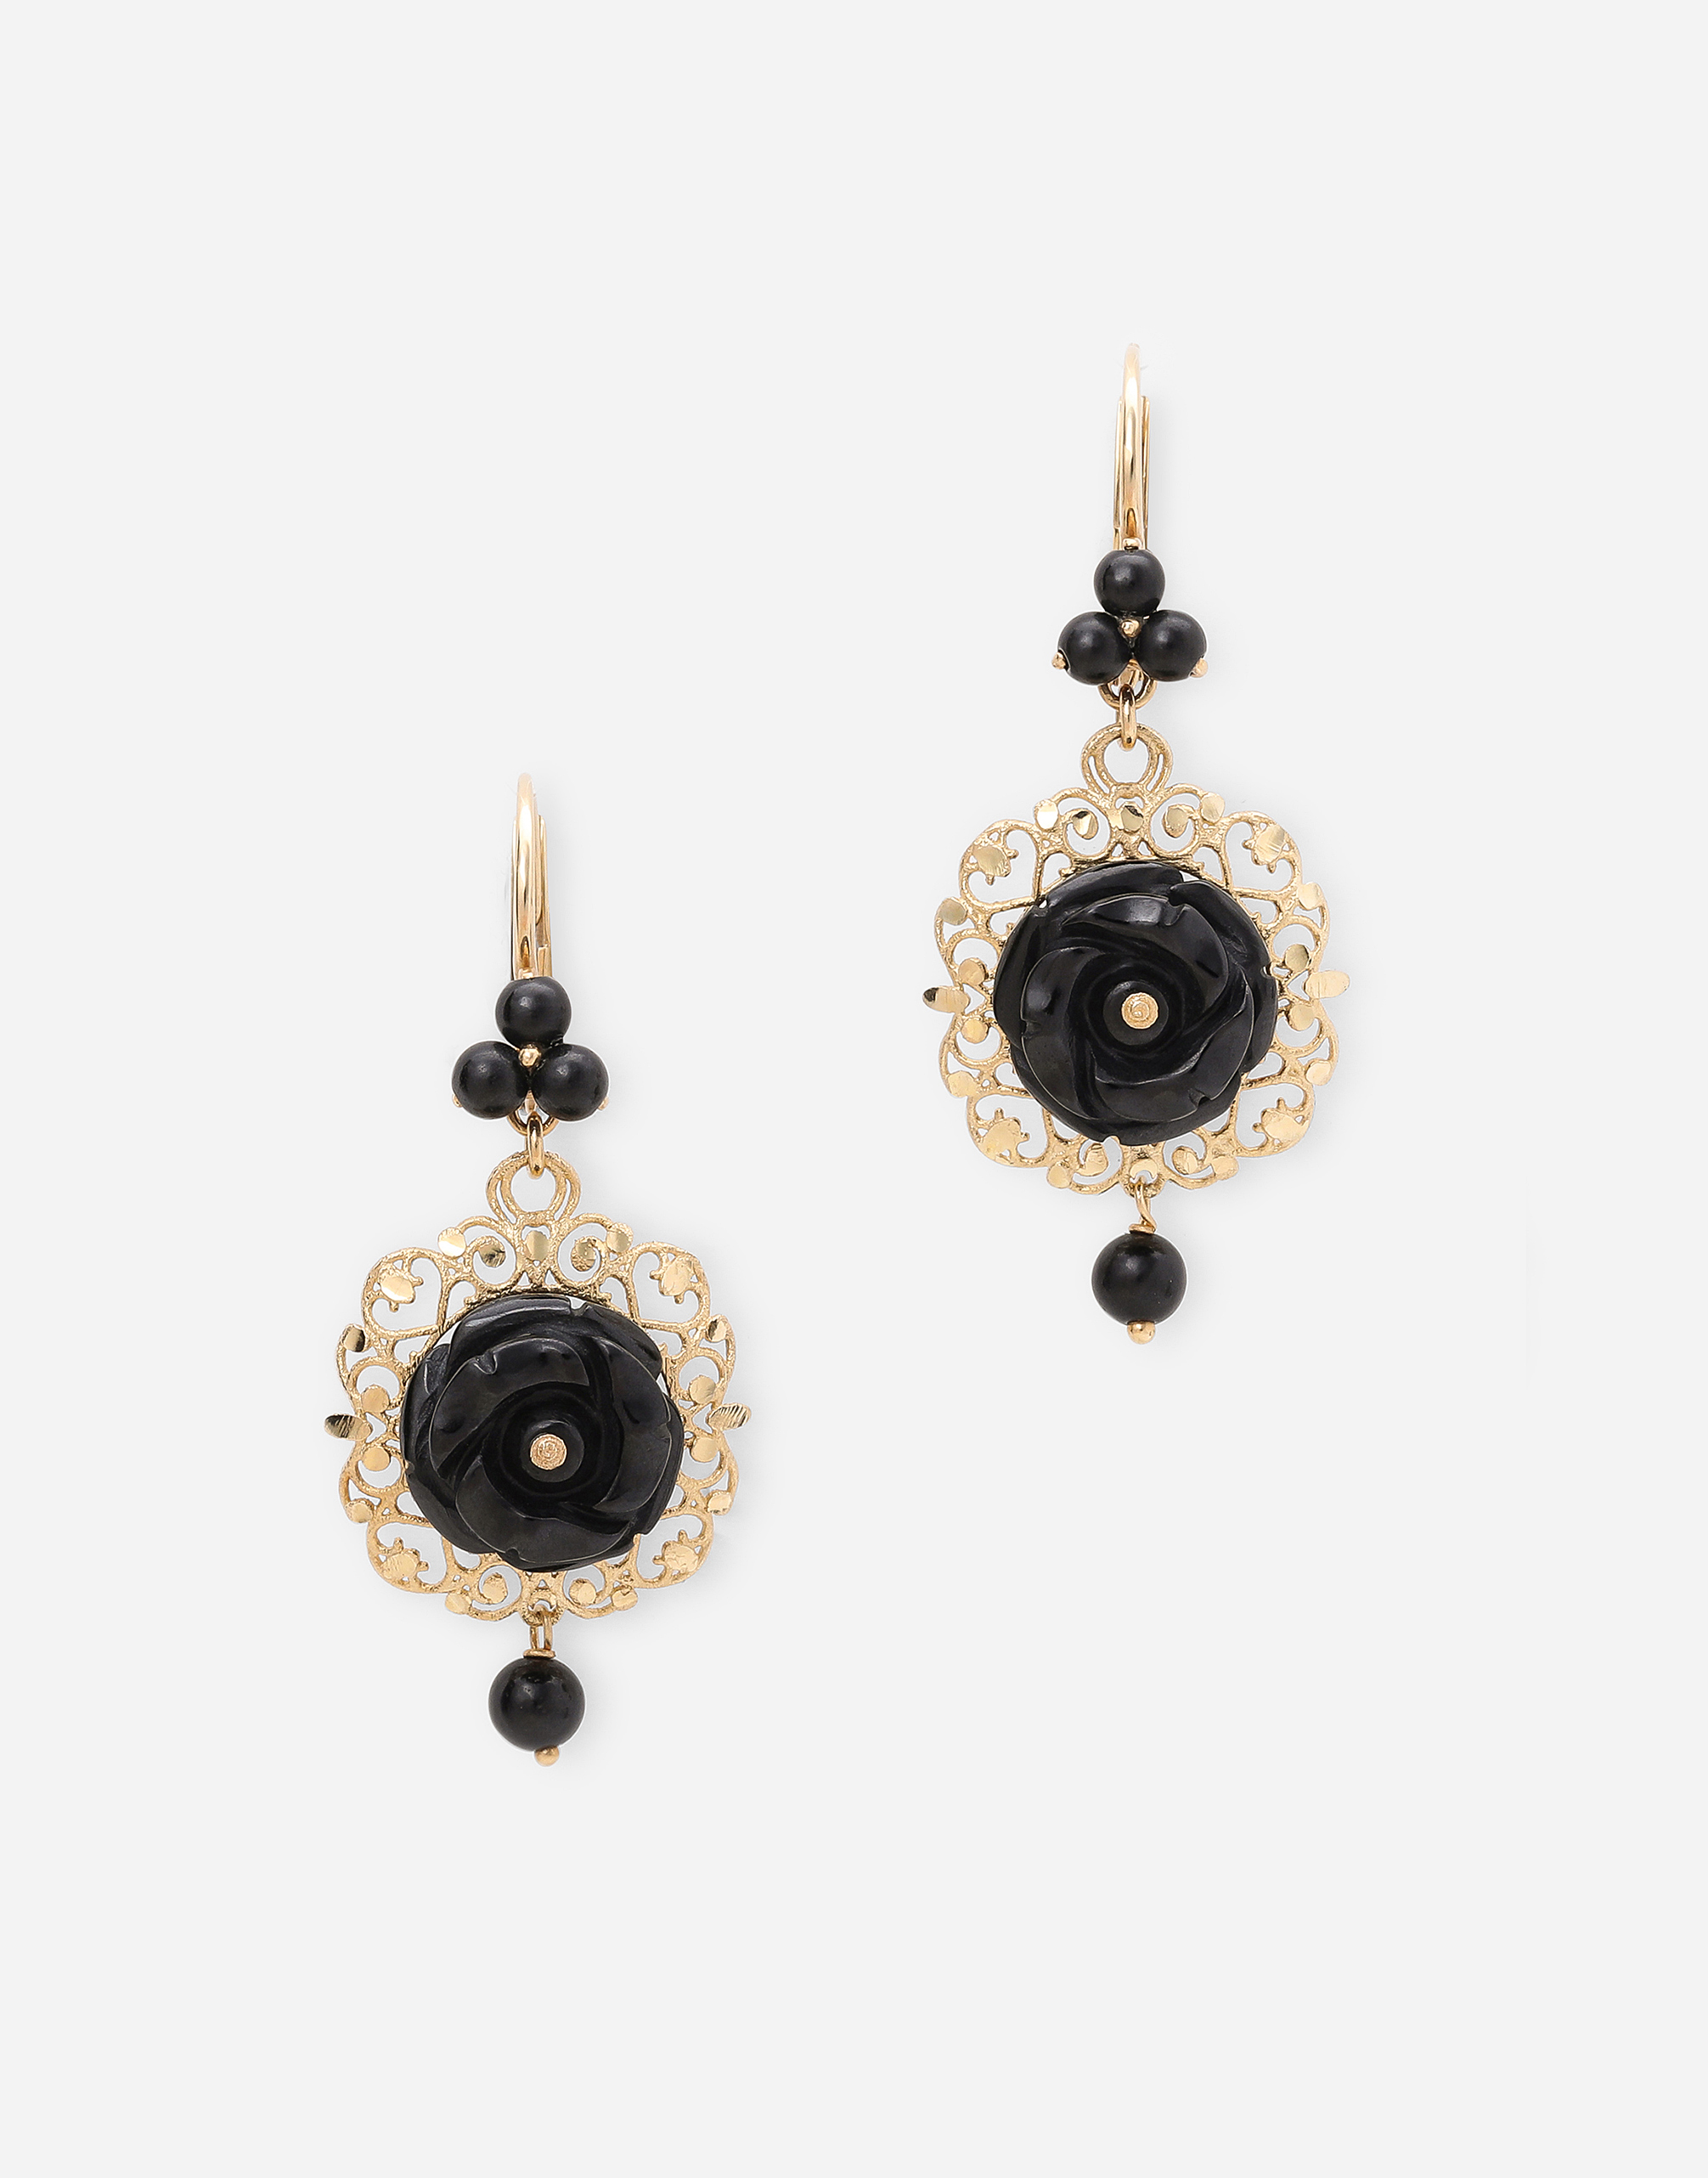 Rose earrings in yellow 18kt gold with black jade roses in Gold